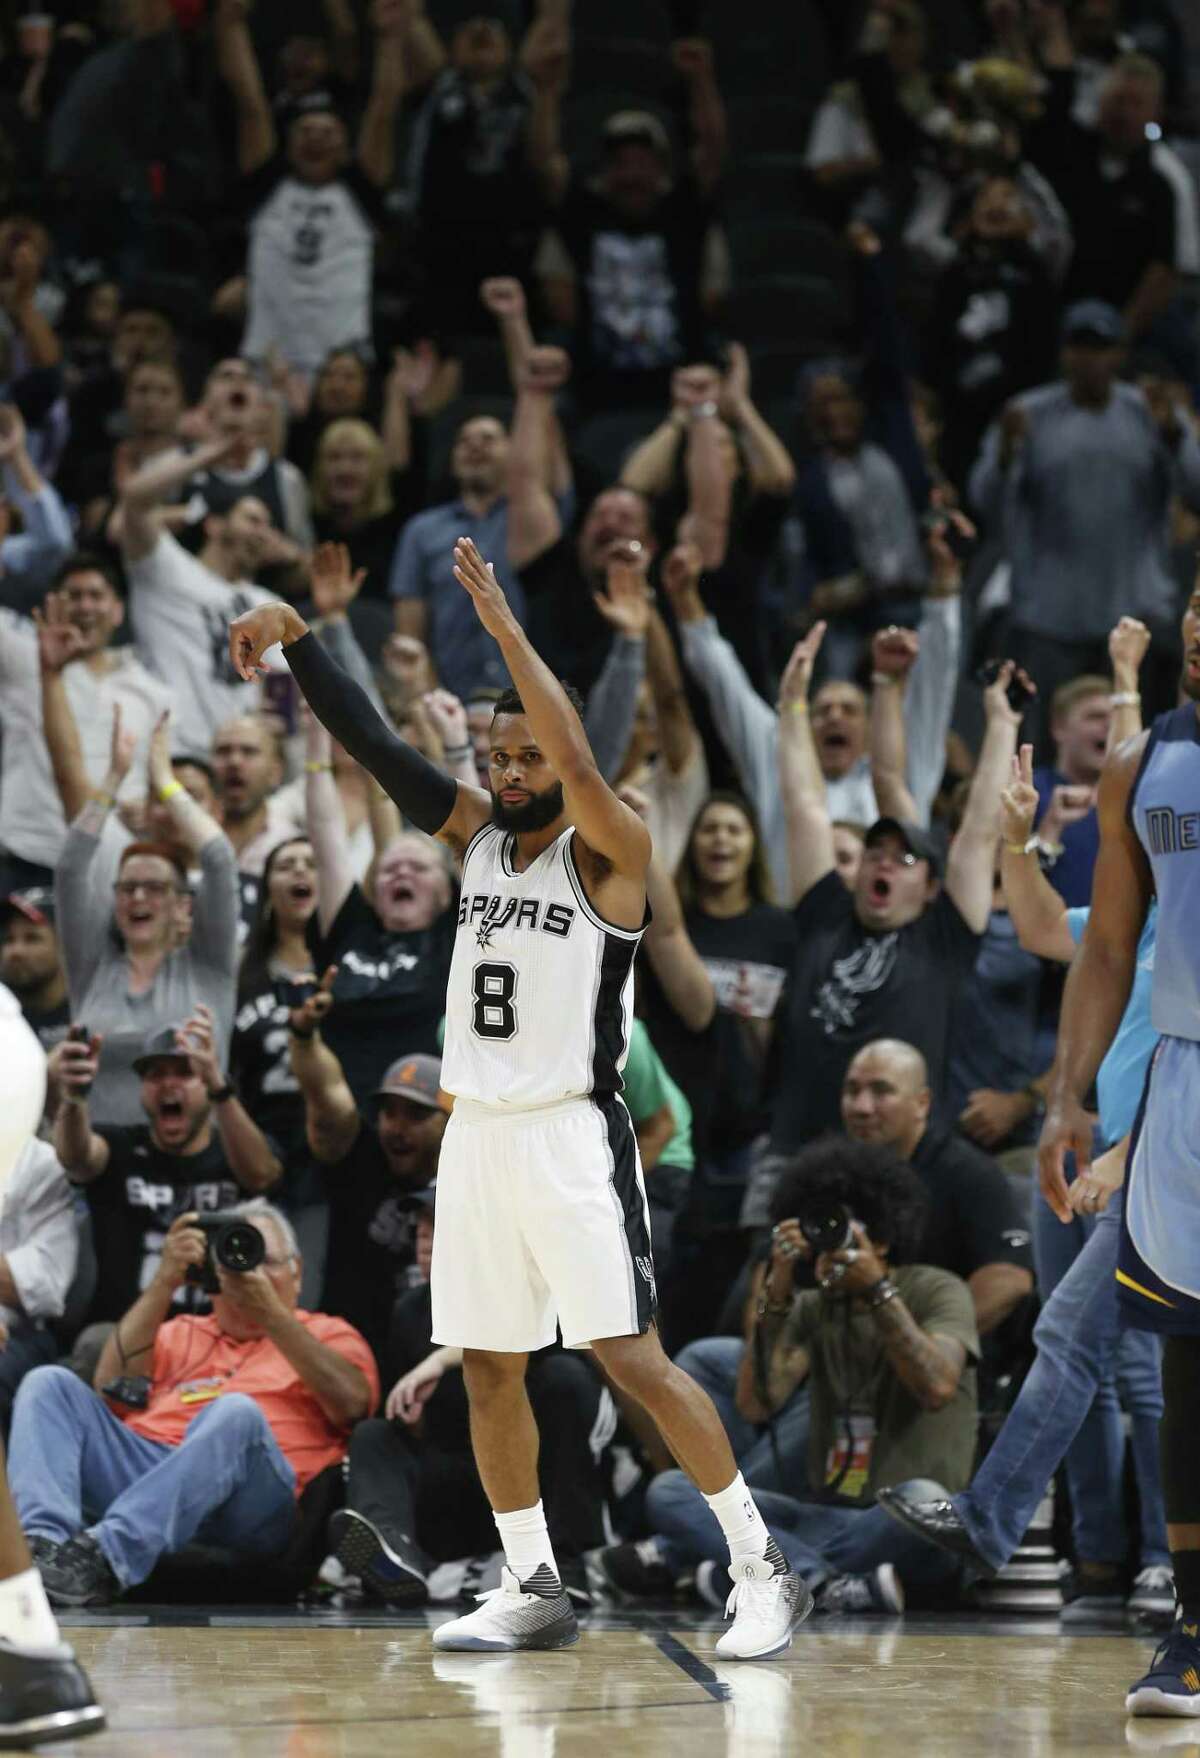 Spurs' Patty Mills (08) holds a pose after hitting a three-pointer in overtime against the Memphis Grizzlies during their game at the AT&T Center on Tuesday, Apr. 4, 2017. Spurs defeated the Grizzlies in overtime, 95-89. (Kin Man Hui/San Antonio Express-News)